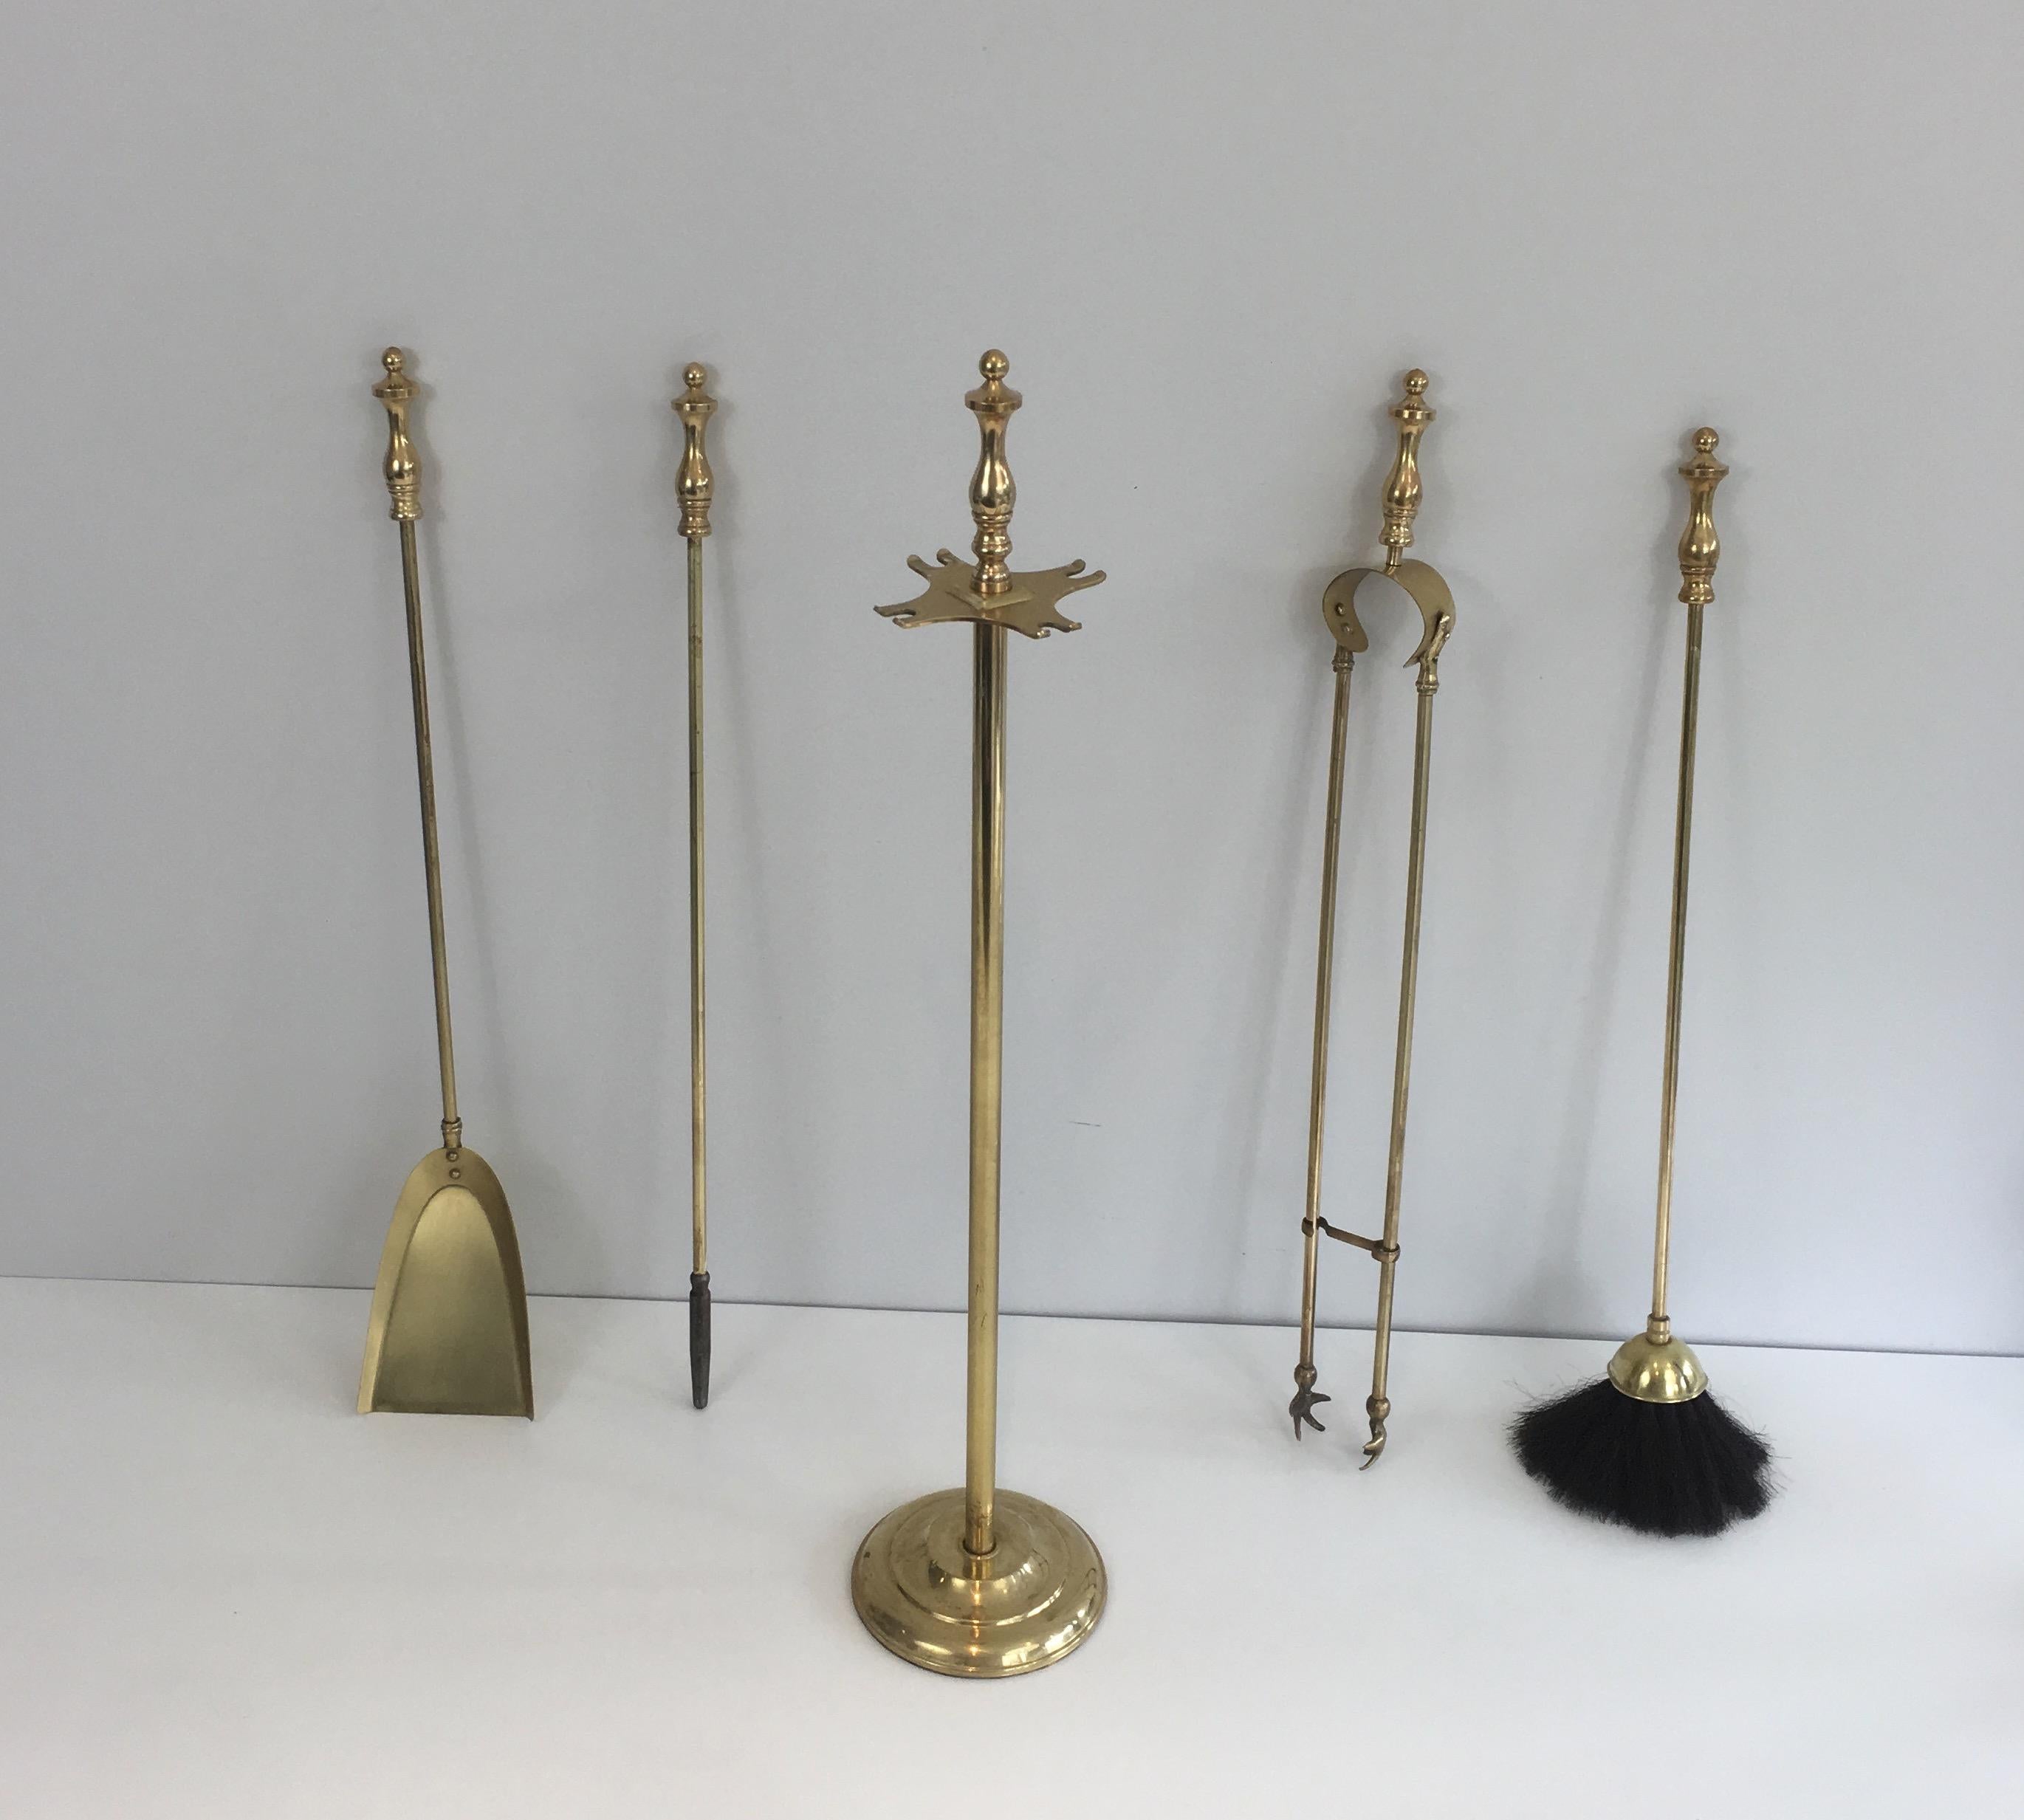 These elegant neoclassical style fire place tools are all made of brass. This is fine French work, circa 1970.